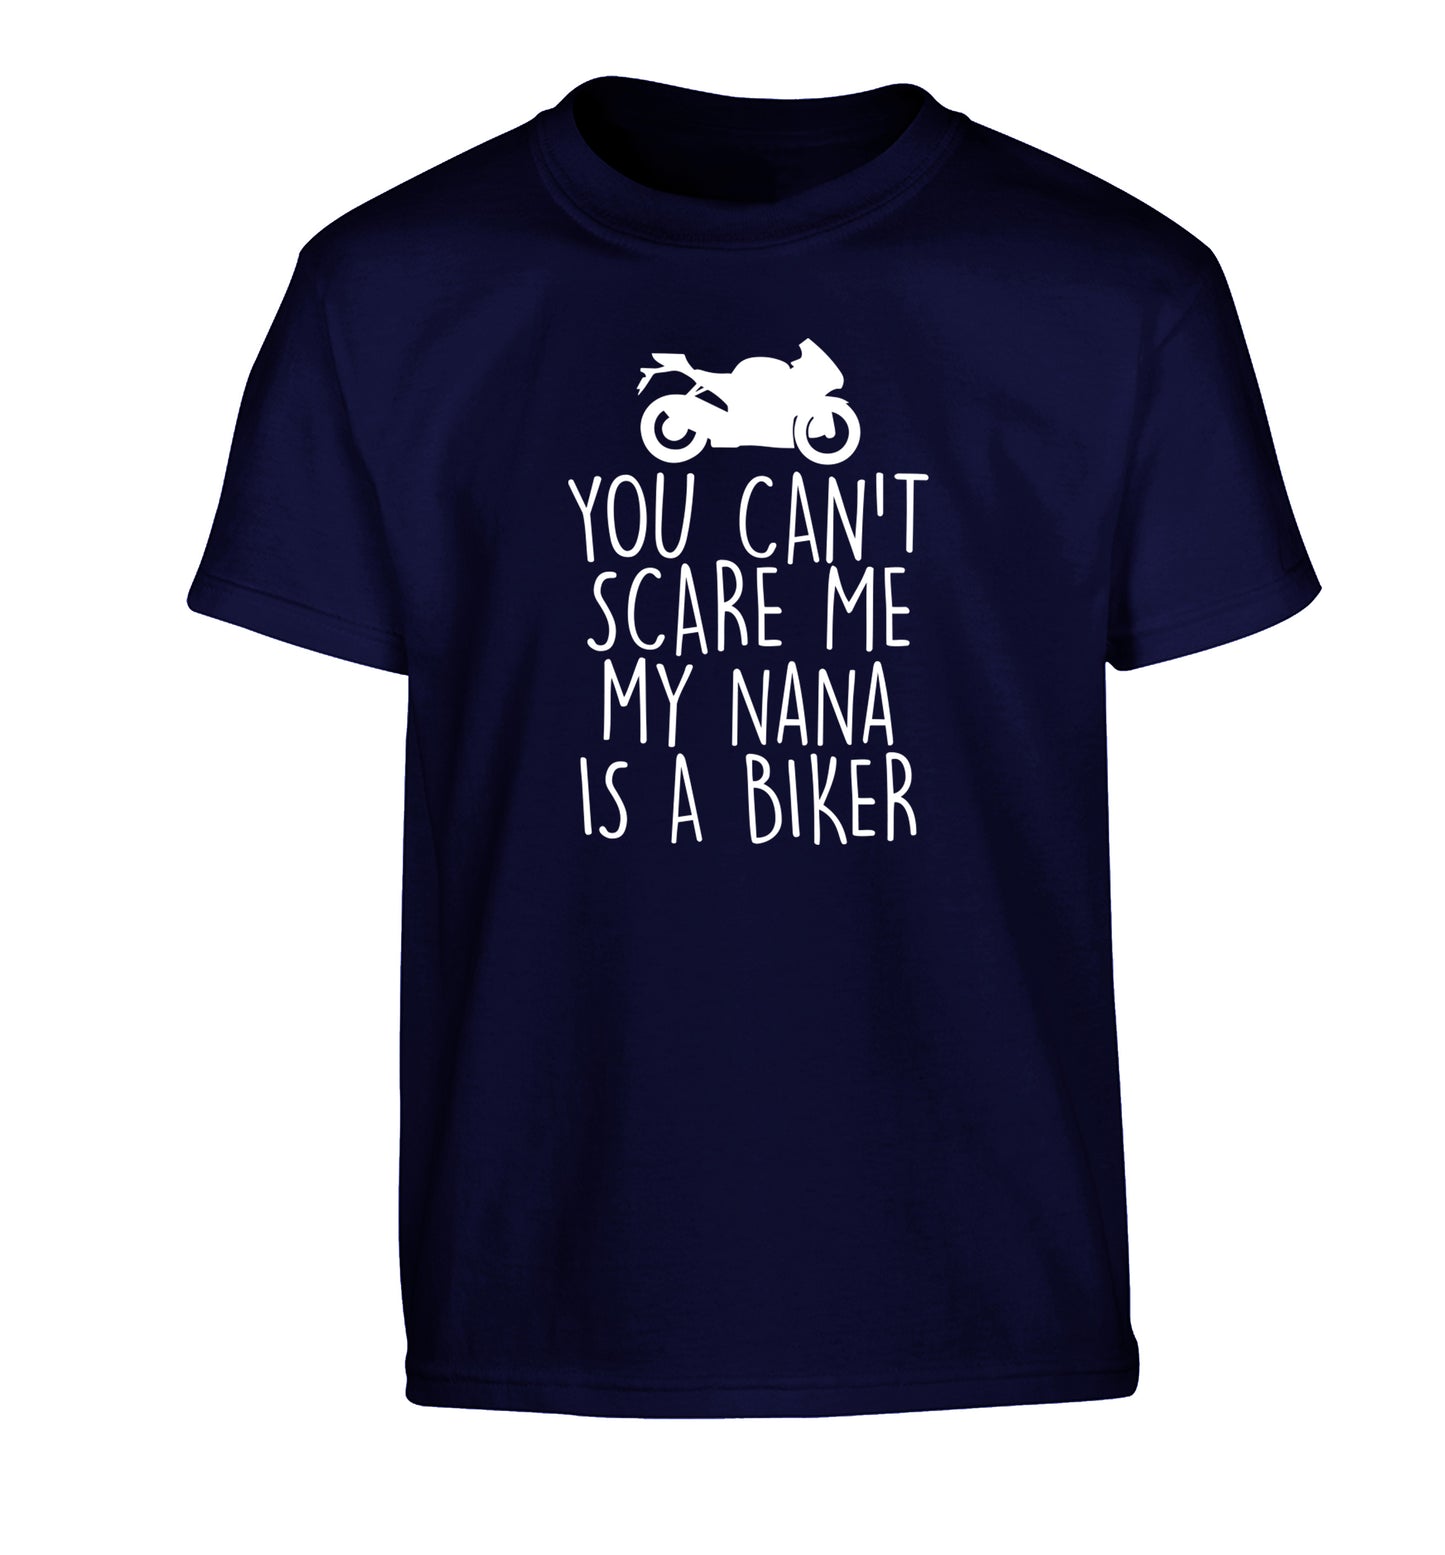 You can't scare me my nana is a biker Children's navy Tshirt 12-13 Years